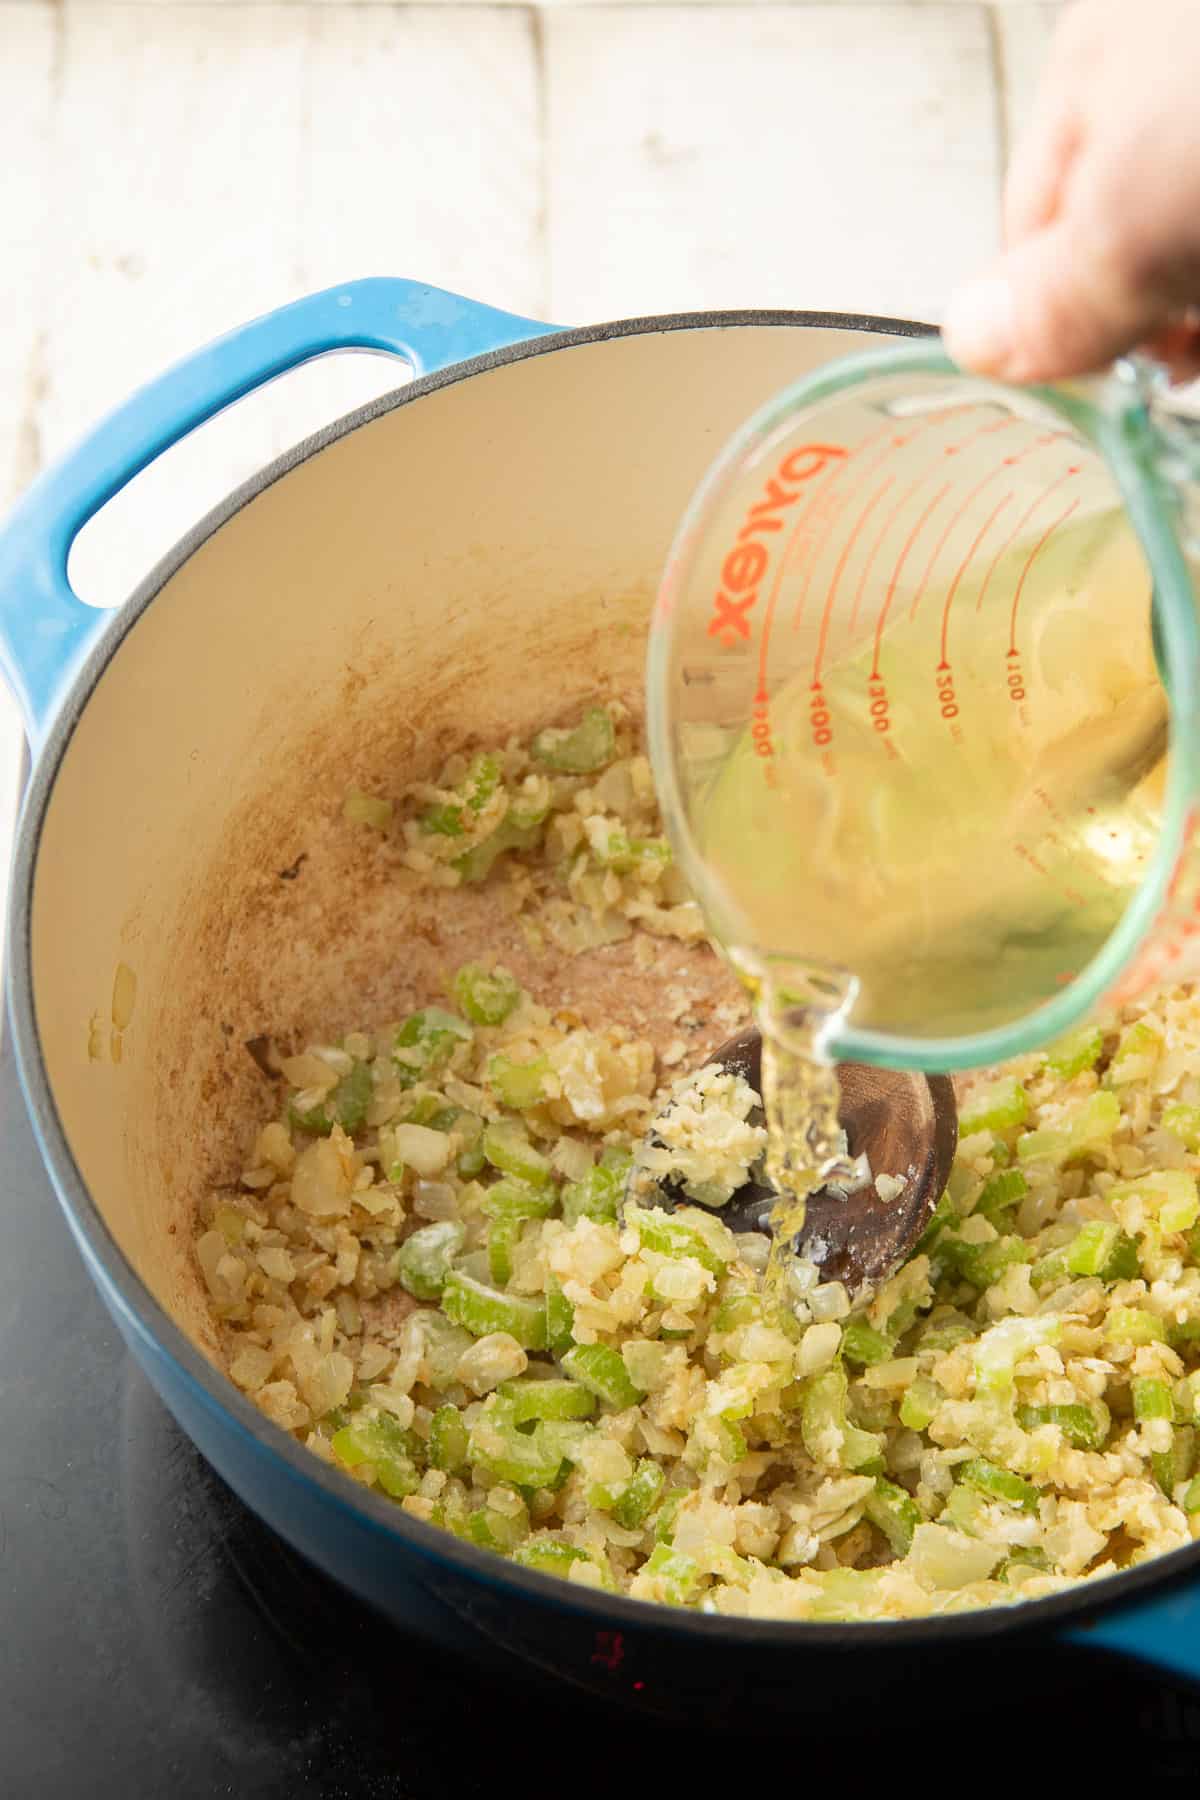 Hand pouring wine into a pot of celery, onions, and flour.